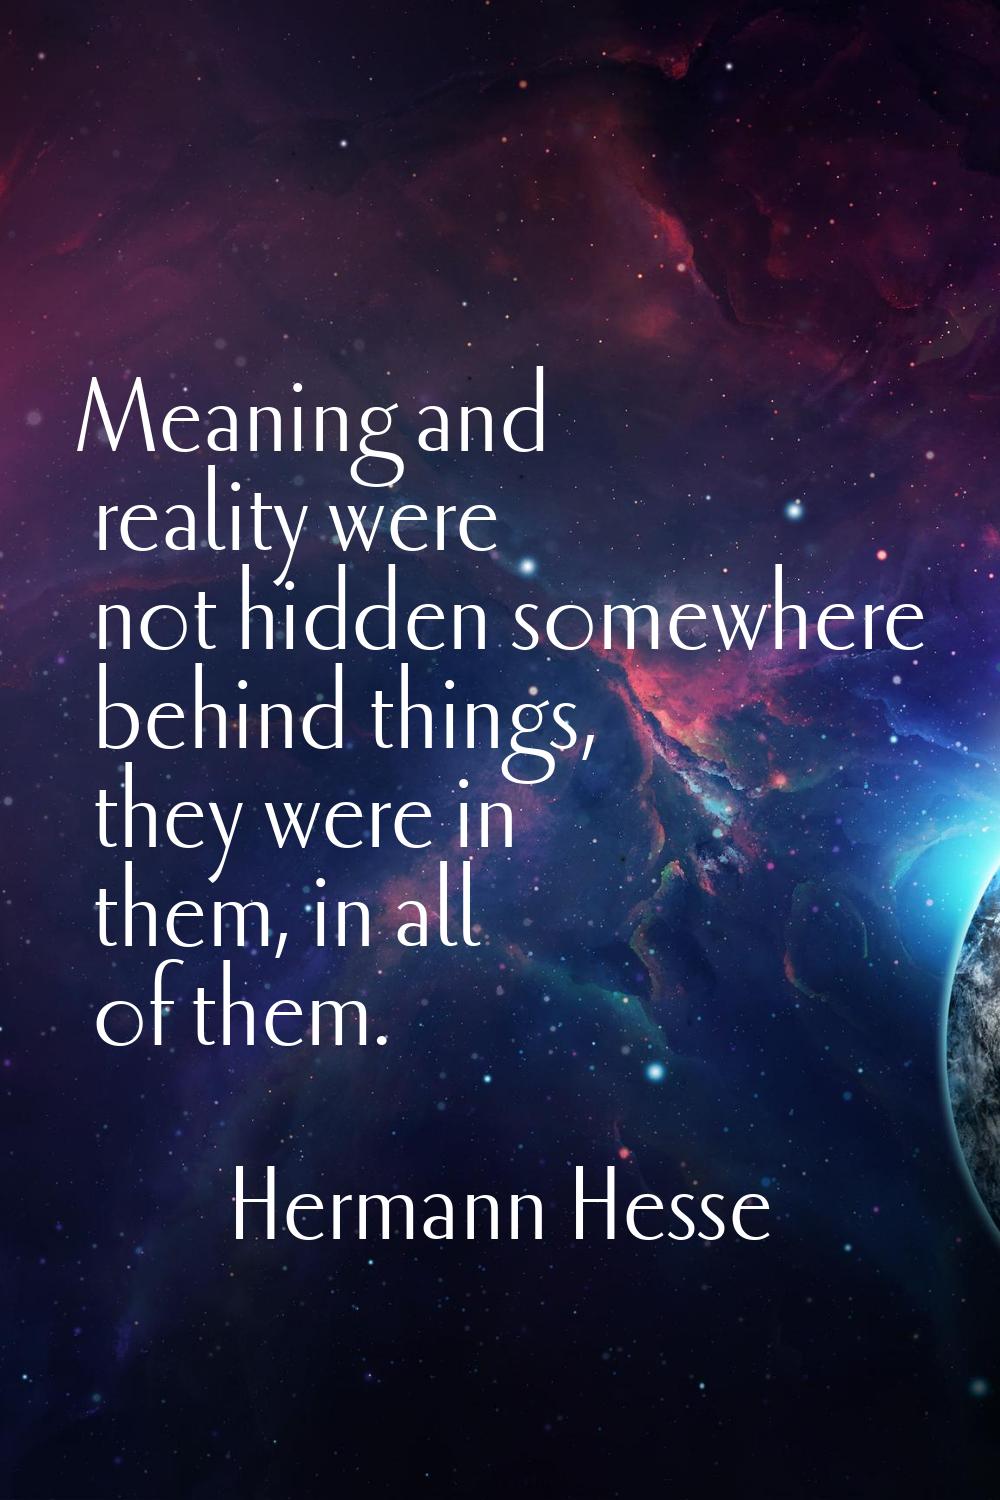 Meaning and reality were not hidden somewhere behind things, they were in them, in all of them.